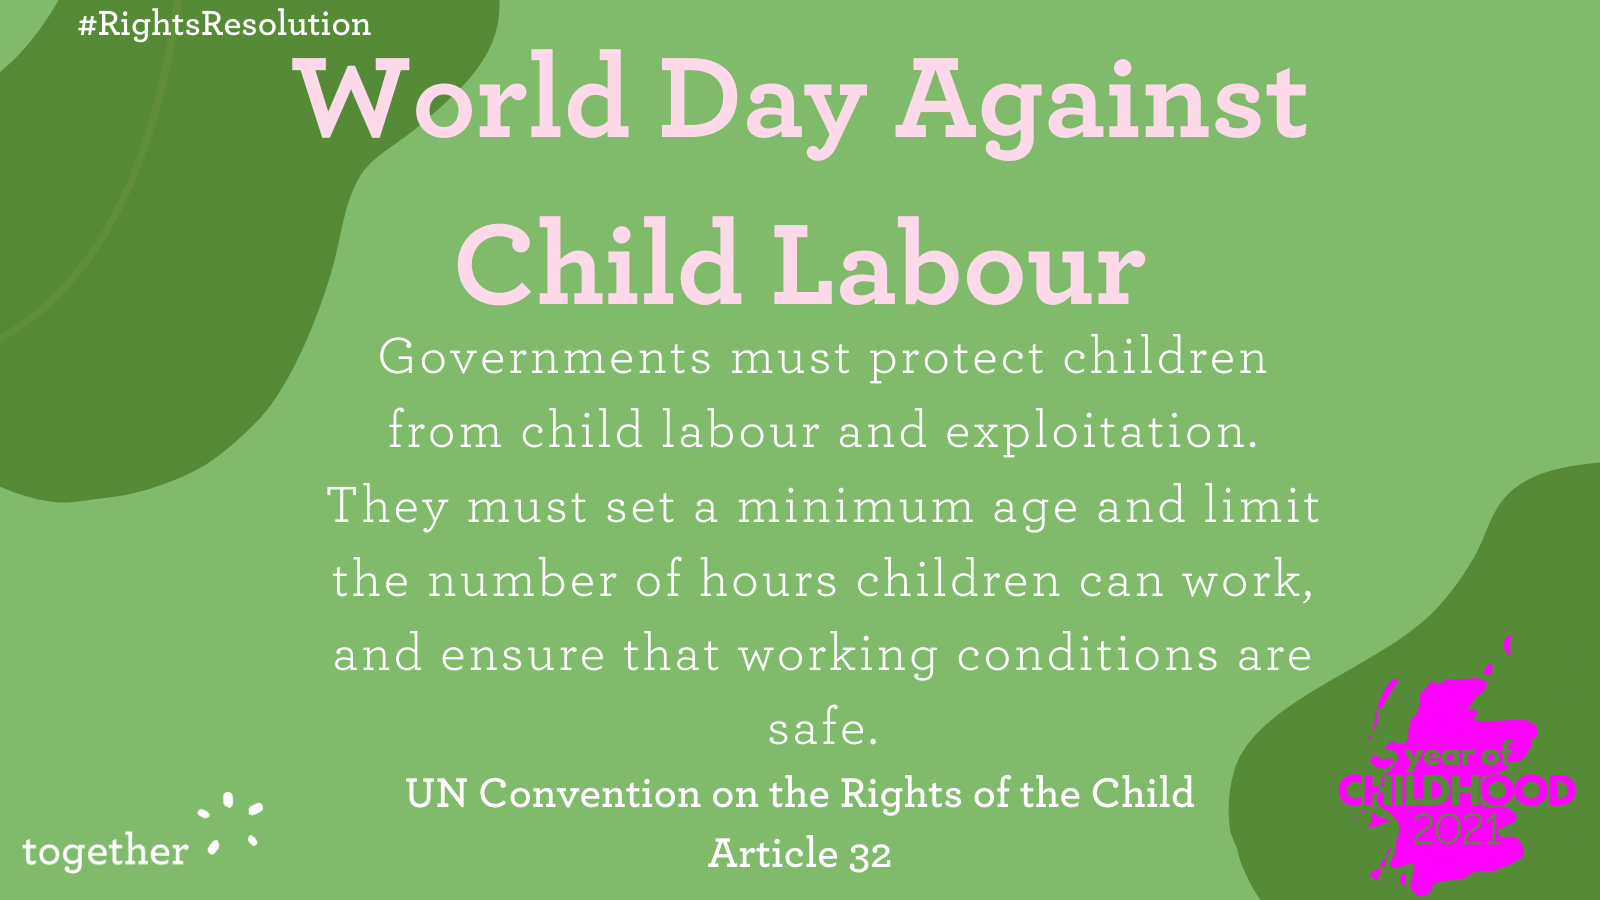 Governments must protect children from child labour and exploitation. They must set a minimum age and limit the number of hours children can work, and ensure that working conditions are safe.